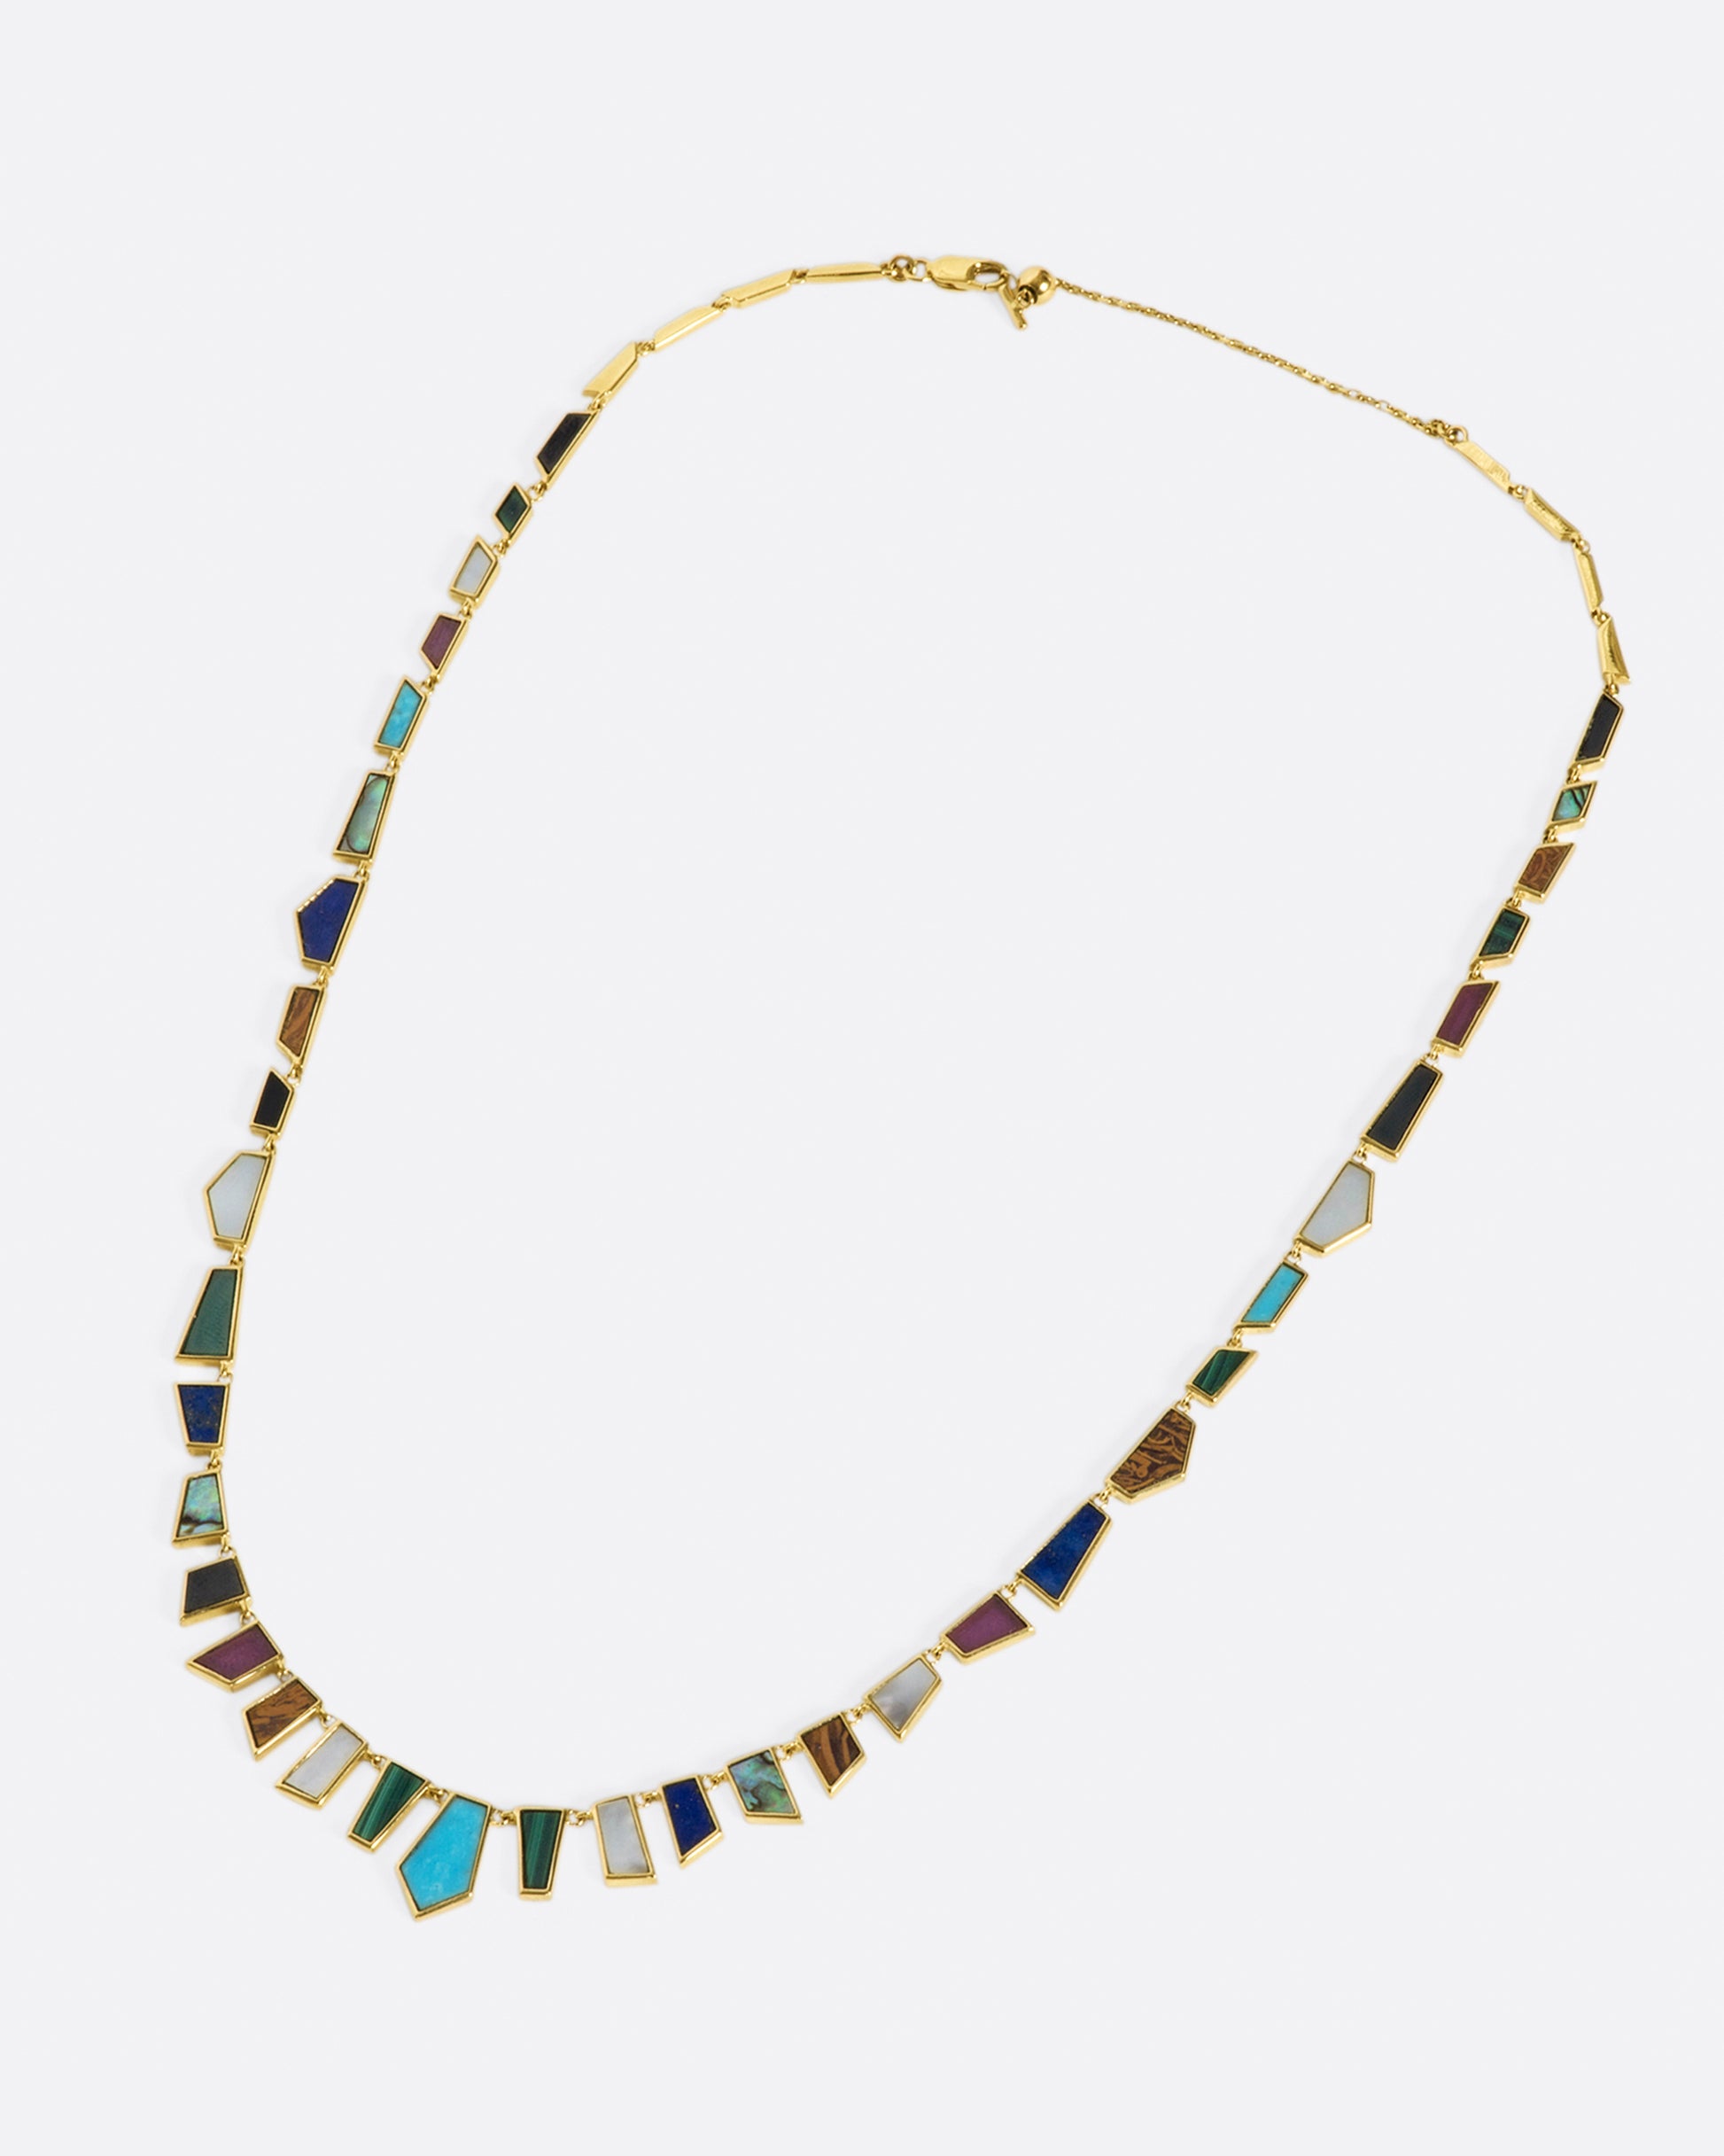 An exceptional array of geometric, hand-cut stones intricately laid in 9k gold. Look closely and, you'll notice the stones are symmetrically cut, while each color is different.